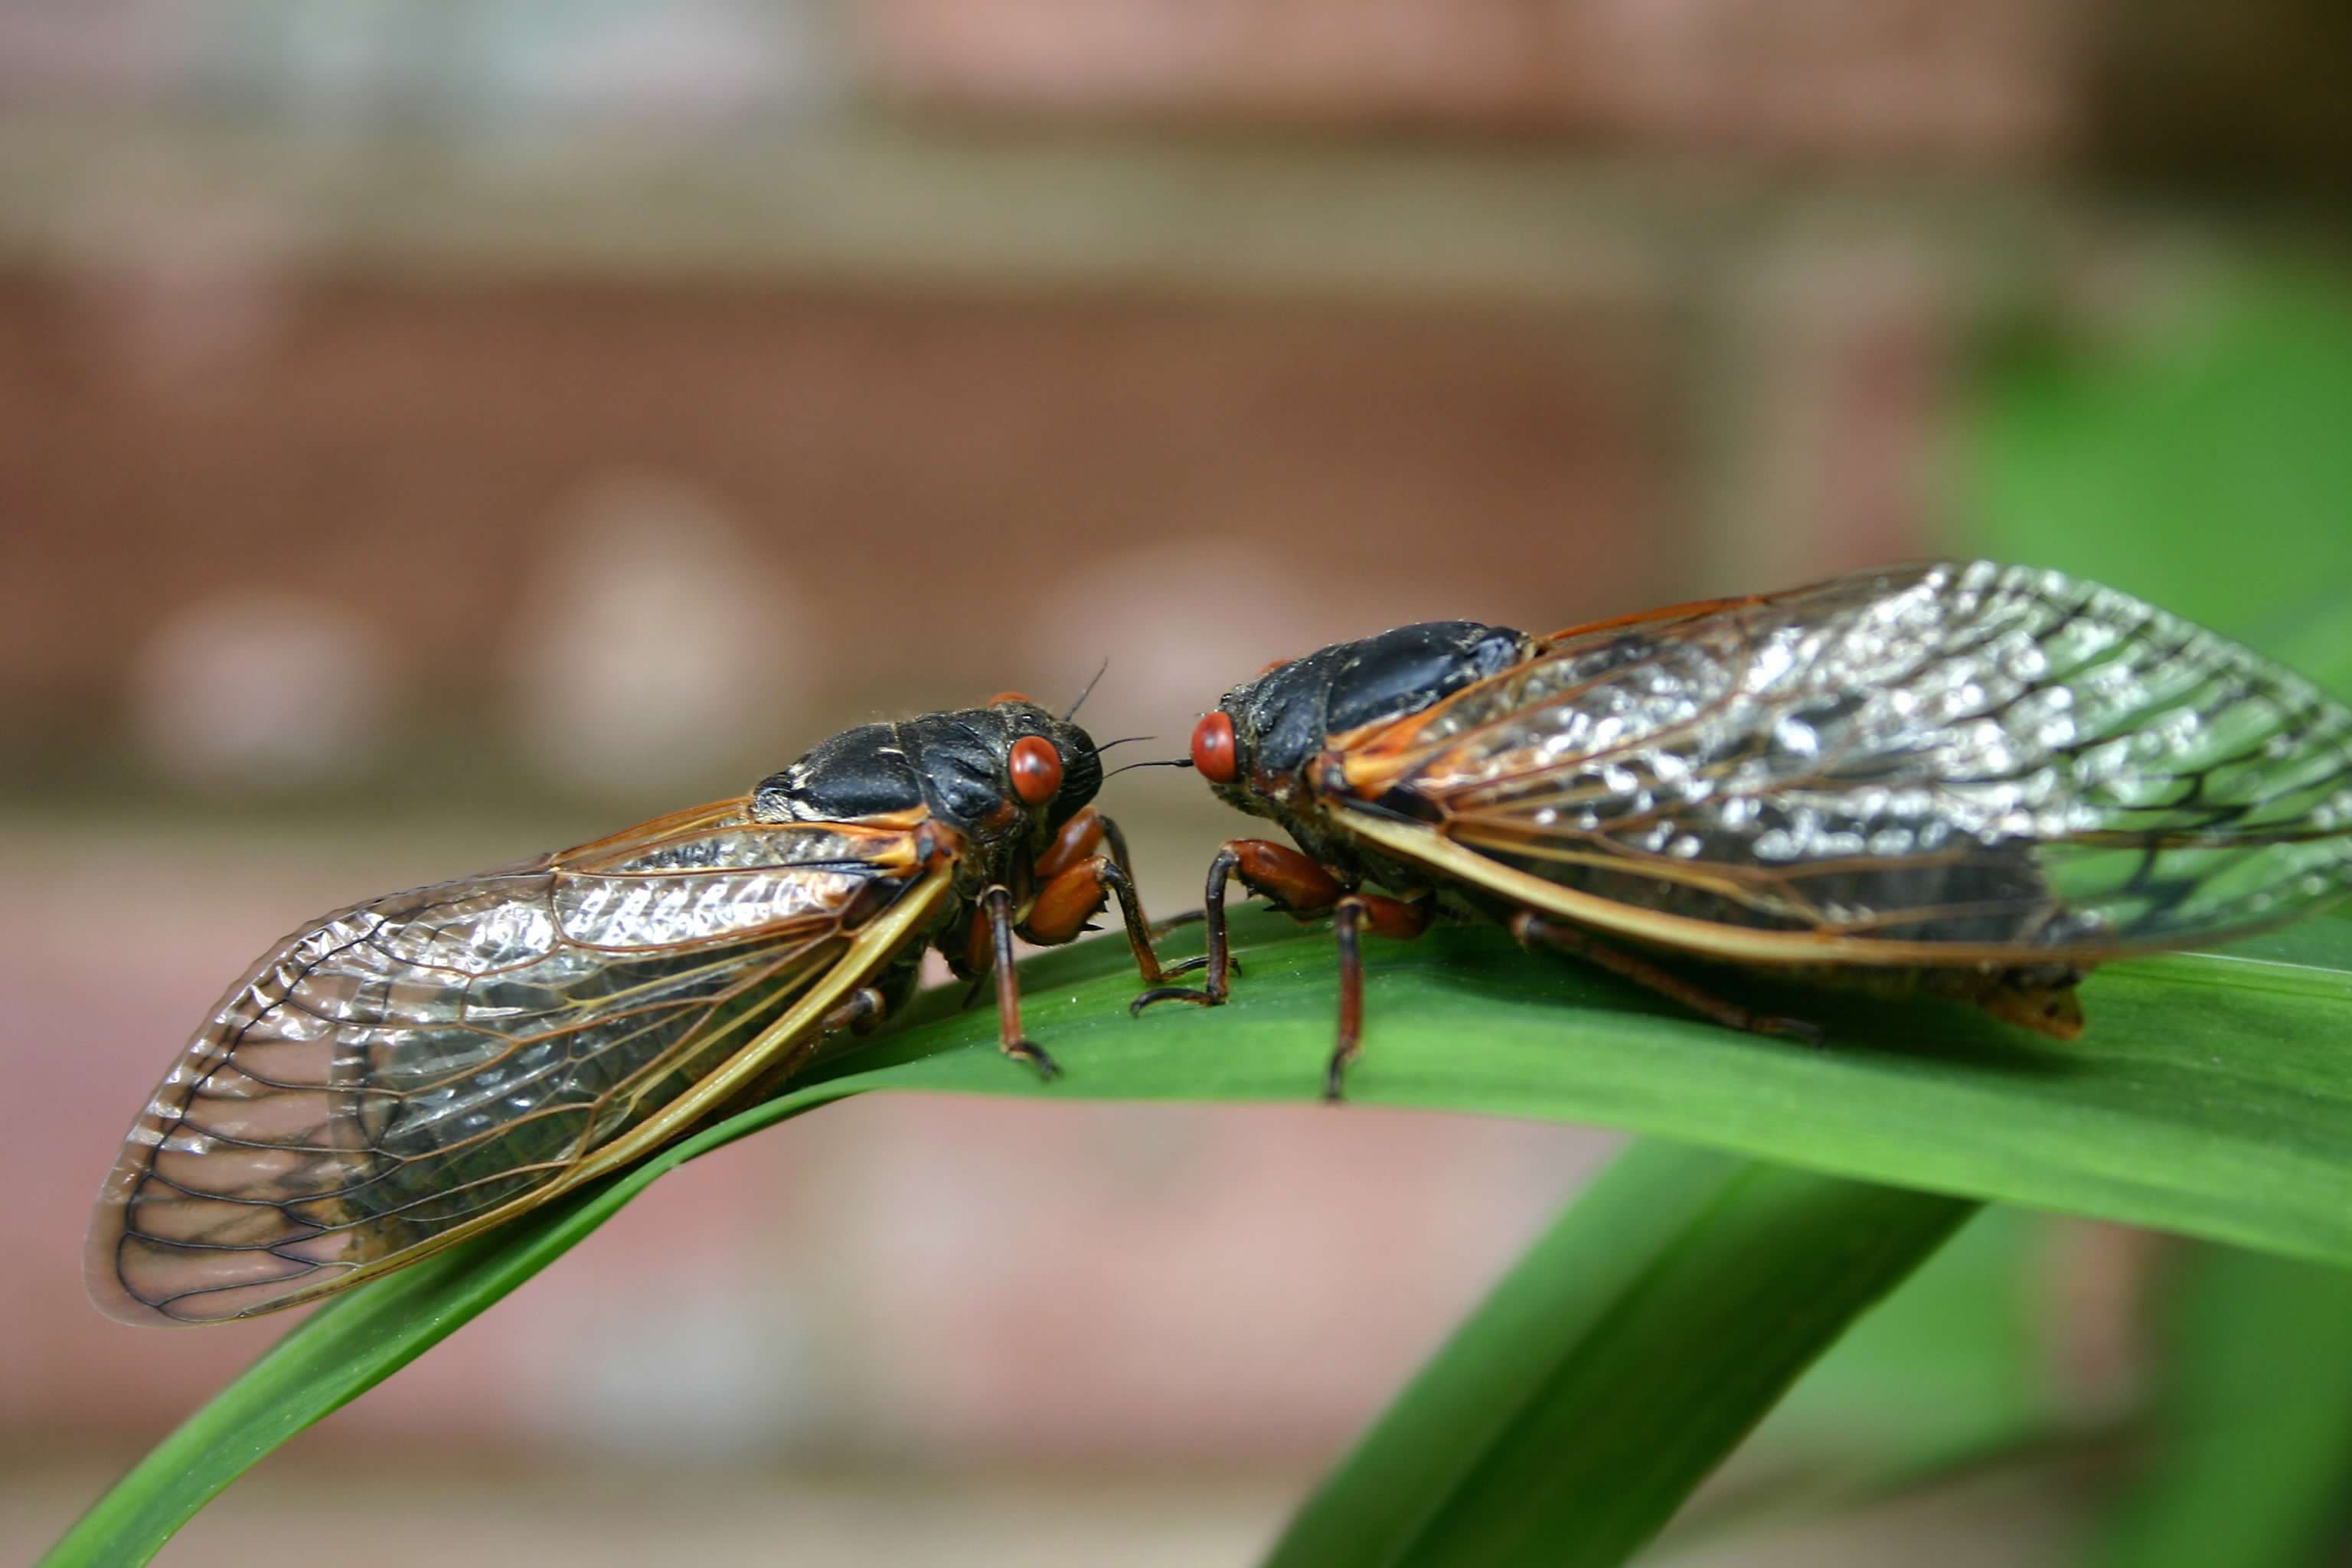 All you need to know about the Brood X Periodical Cicada in new Penn